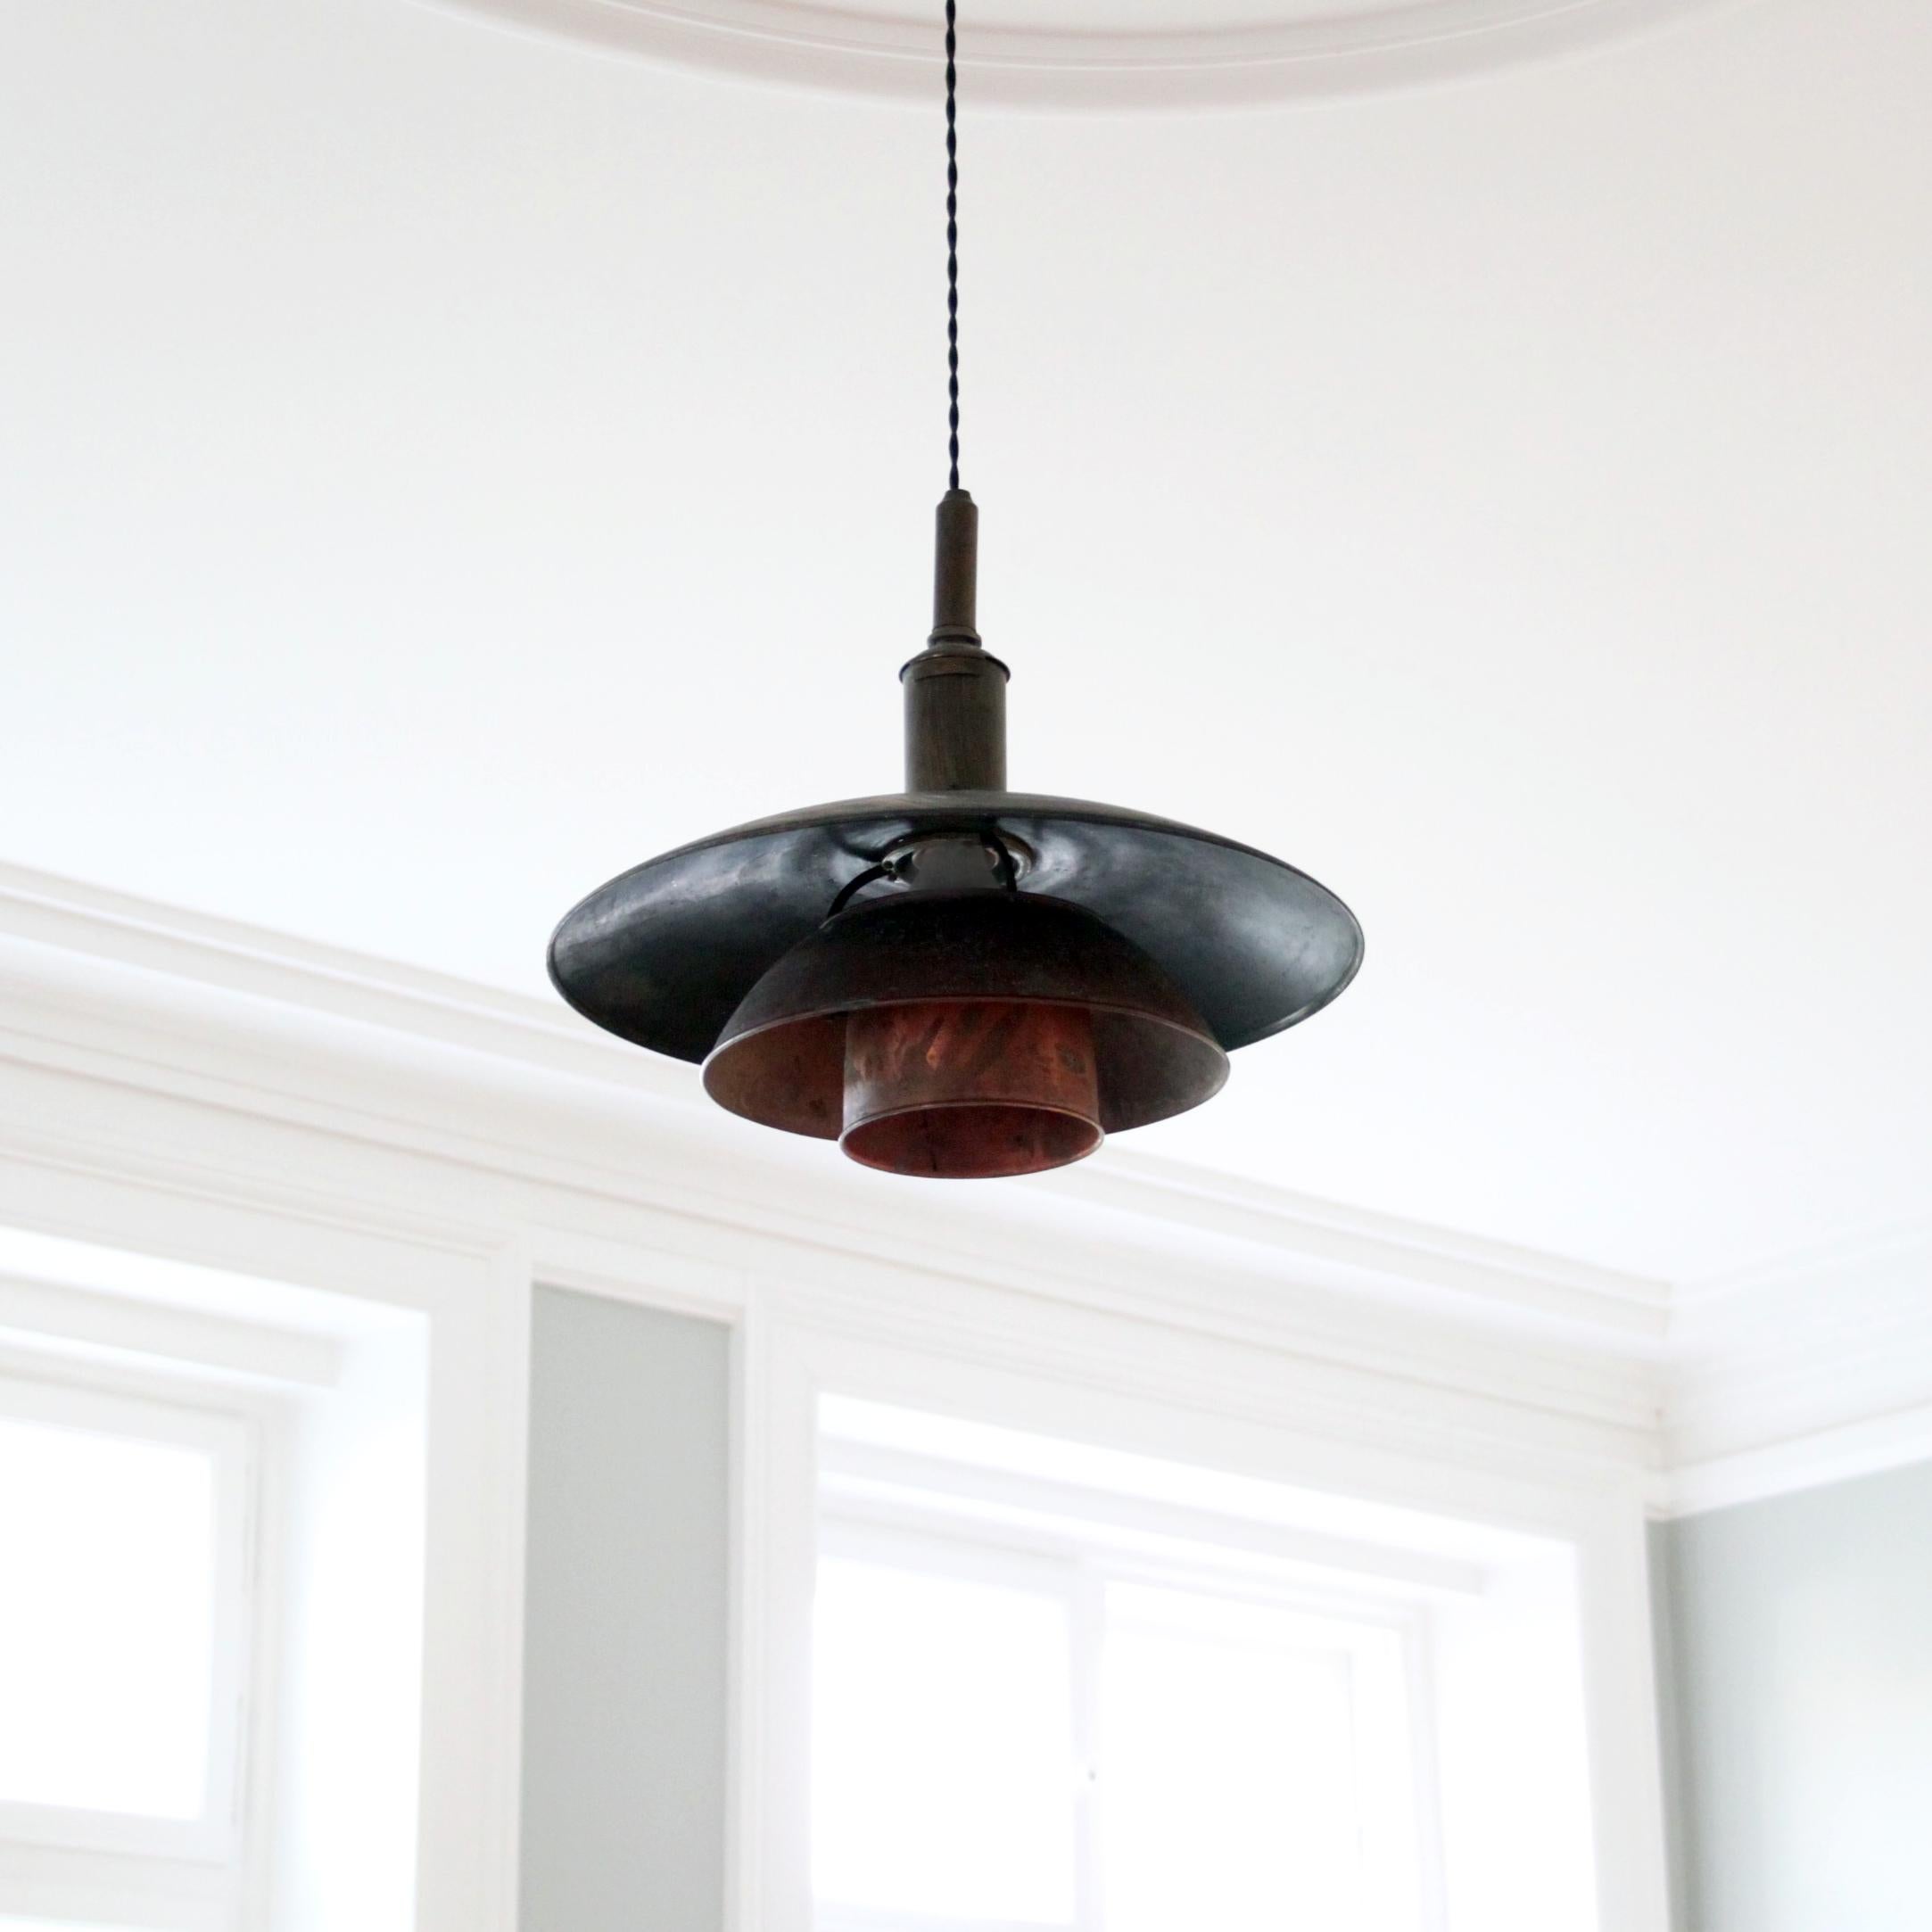 POUL HENNINGSEN & LOUIS POULSEN, SCANDINAVIAN MODERN

Large PH Pendant 4/4 in copper, designed by Poul Henningsen and manufactured by Louis Poulsen. 

Early model. Stamped Pat. Appl, Ca. 1928

Pendant with three shades that gives a beautiful light